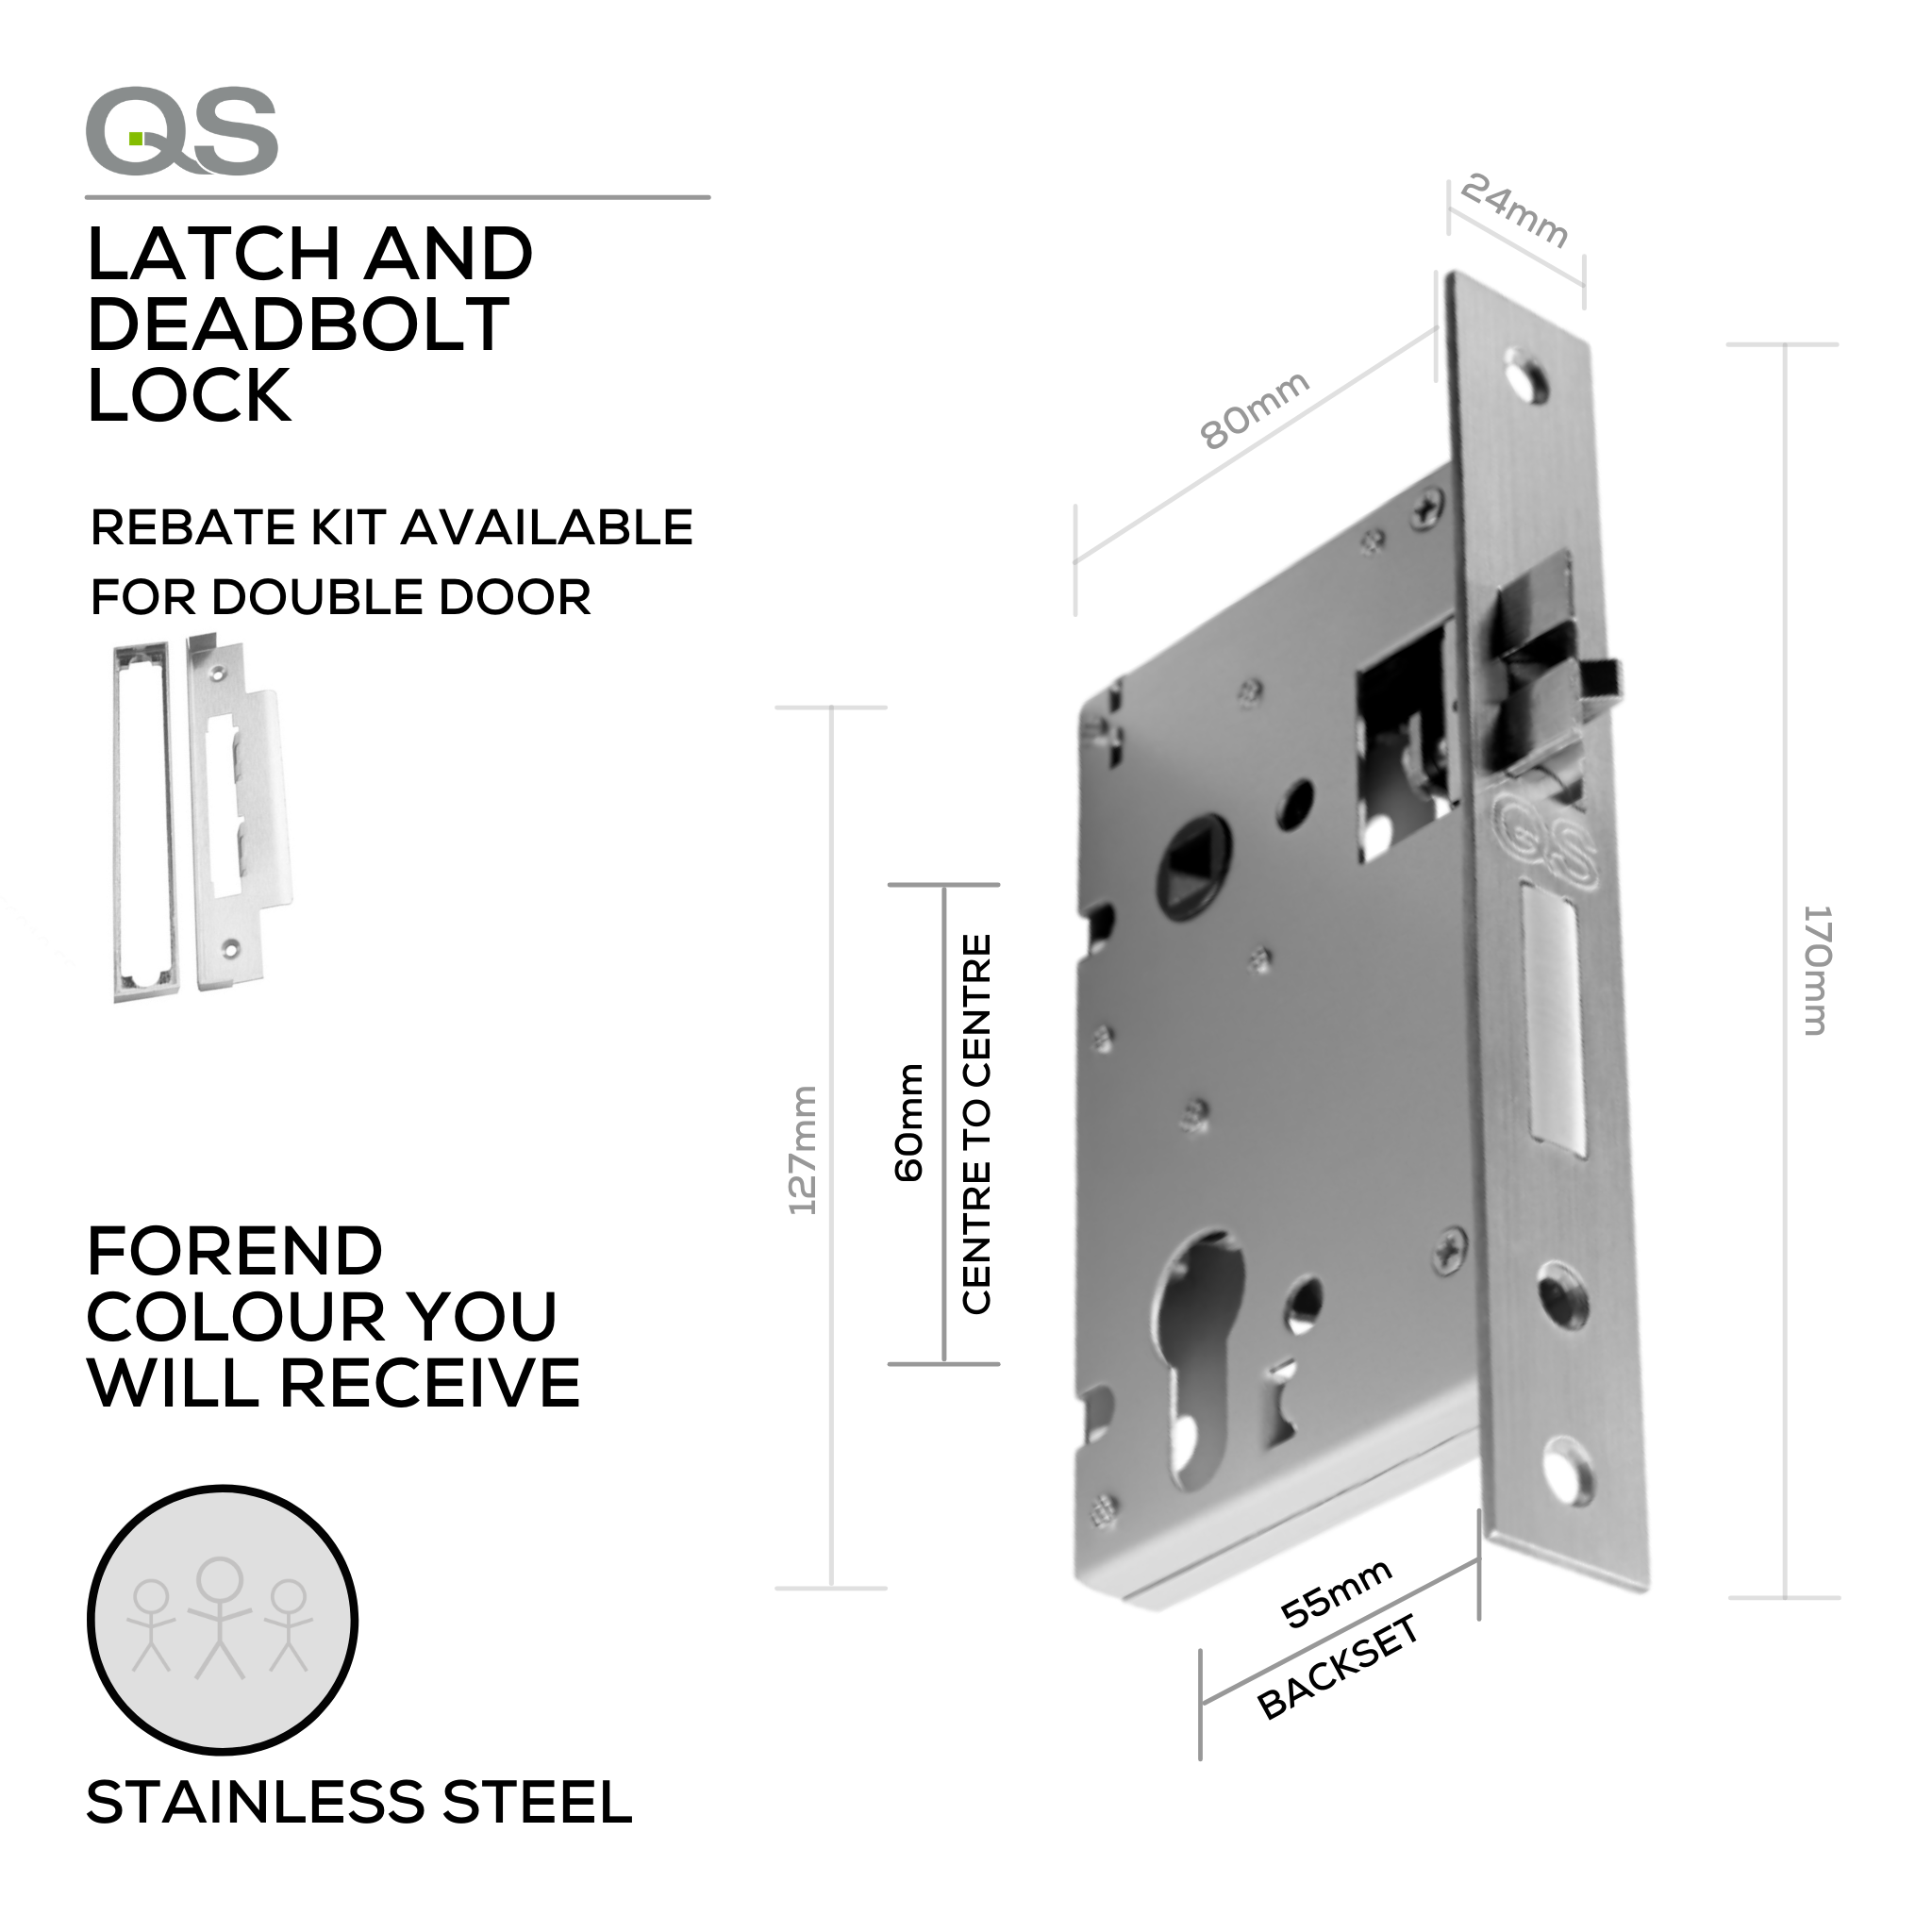 QS6055/1/SS, Latch & Deadbolt Lock, Euro Cylinder, Excluding Cylinder, 55mm (Backset), 60mm (ctc), Stainless Steel, QS